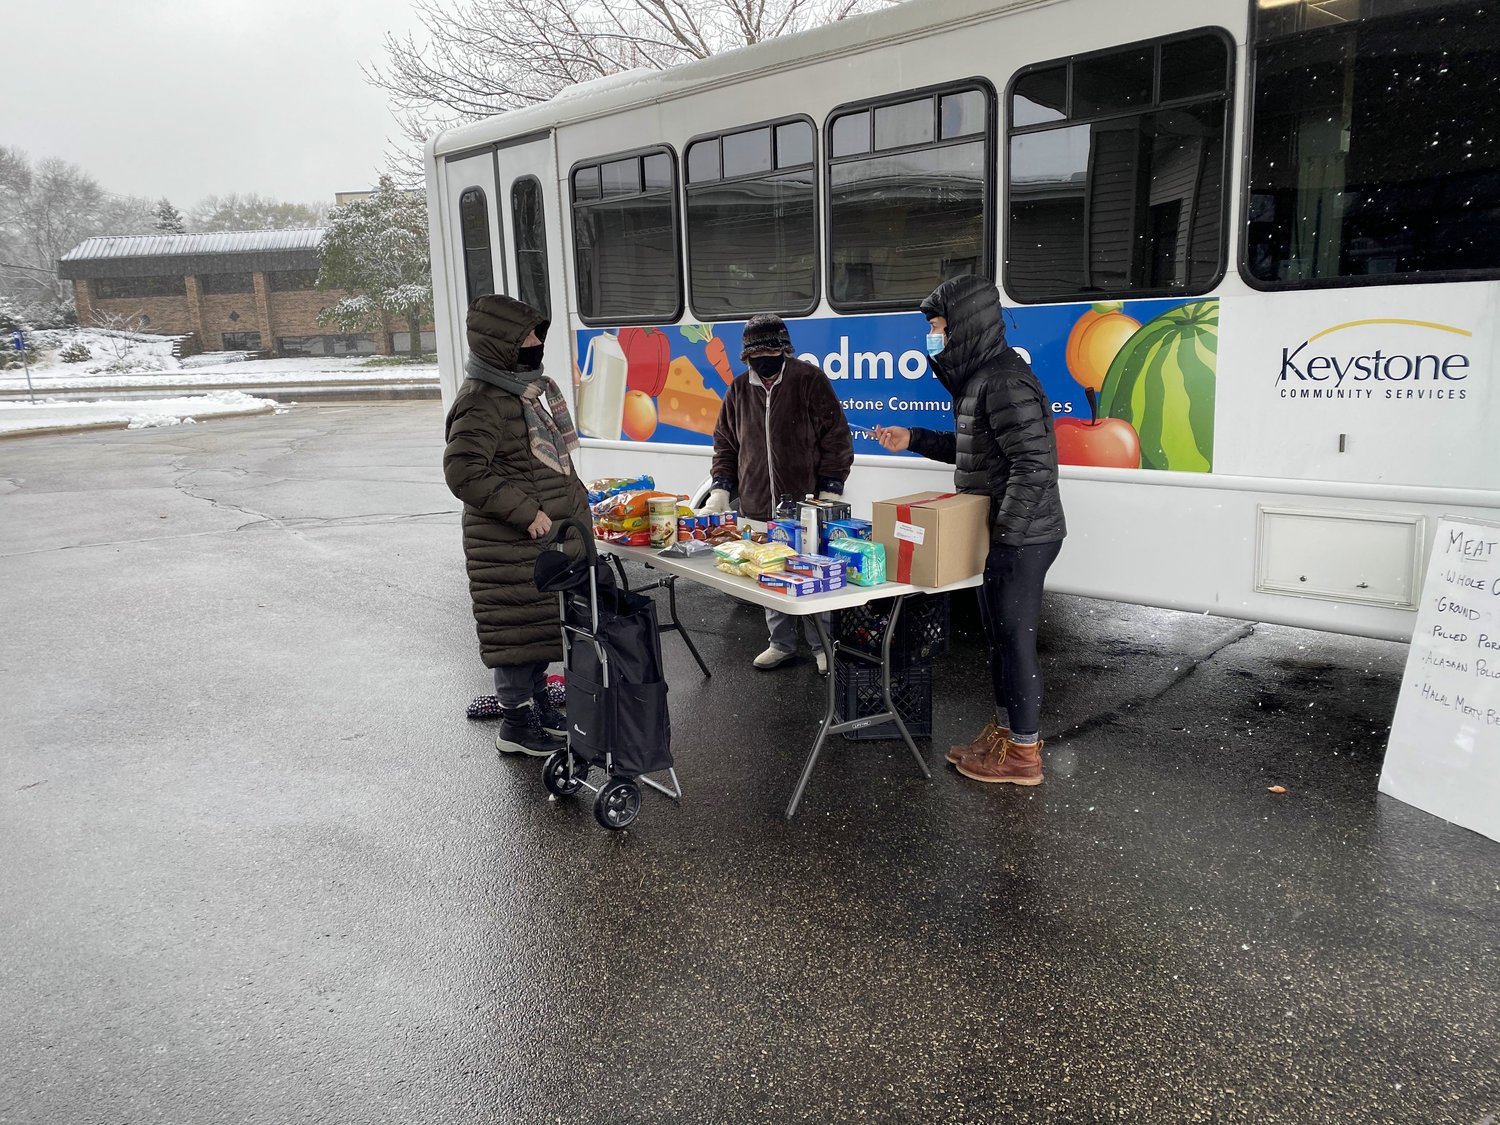 The two Foodmobiles make multiple stops in St. Paul each week, offering food choices. Find the schedule at keystoneservices.org. (Photo by Logan Murphy)